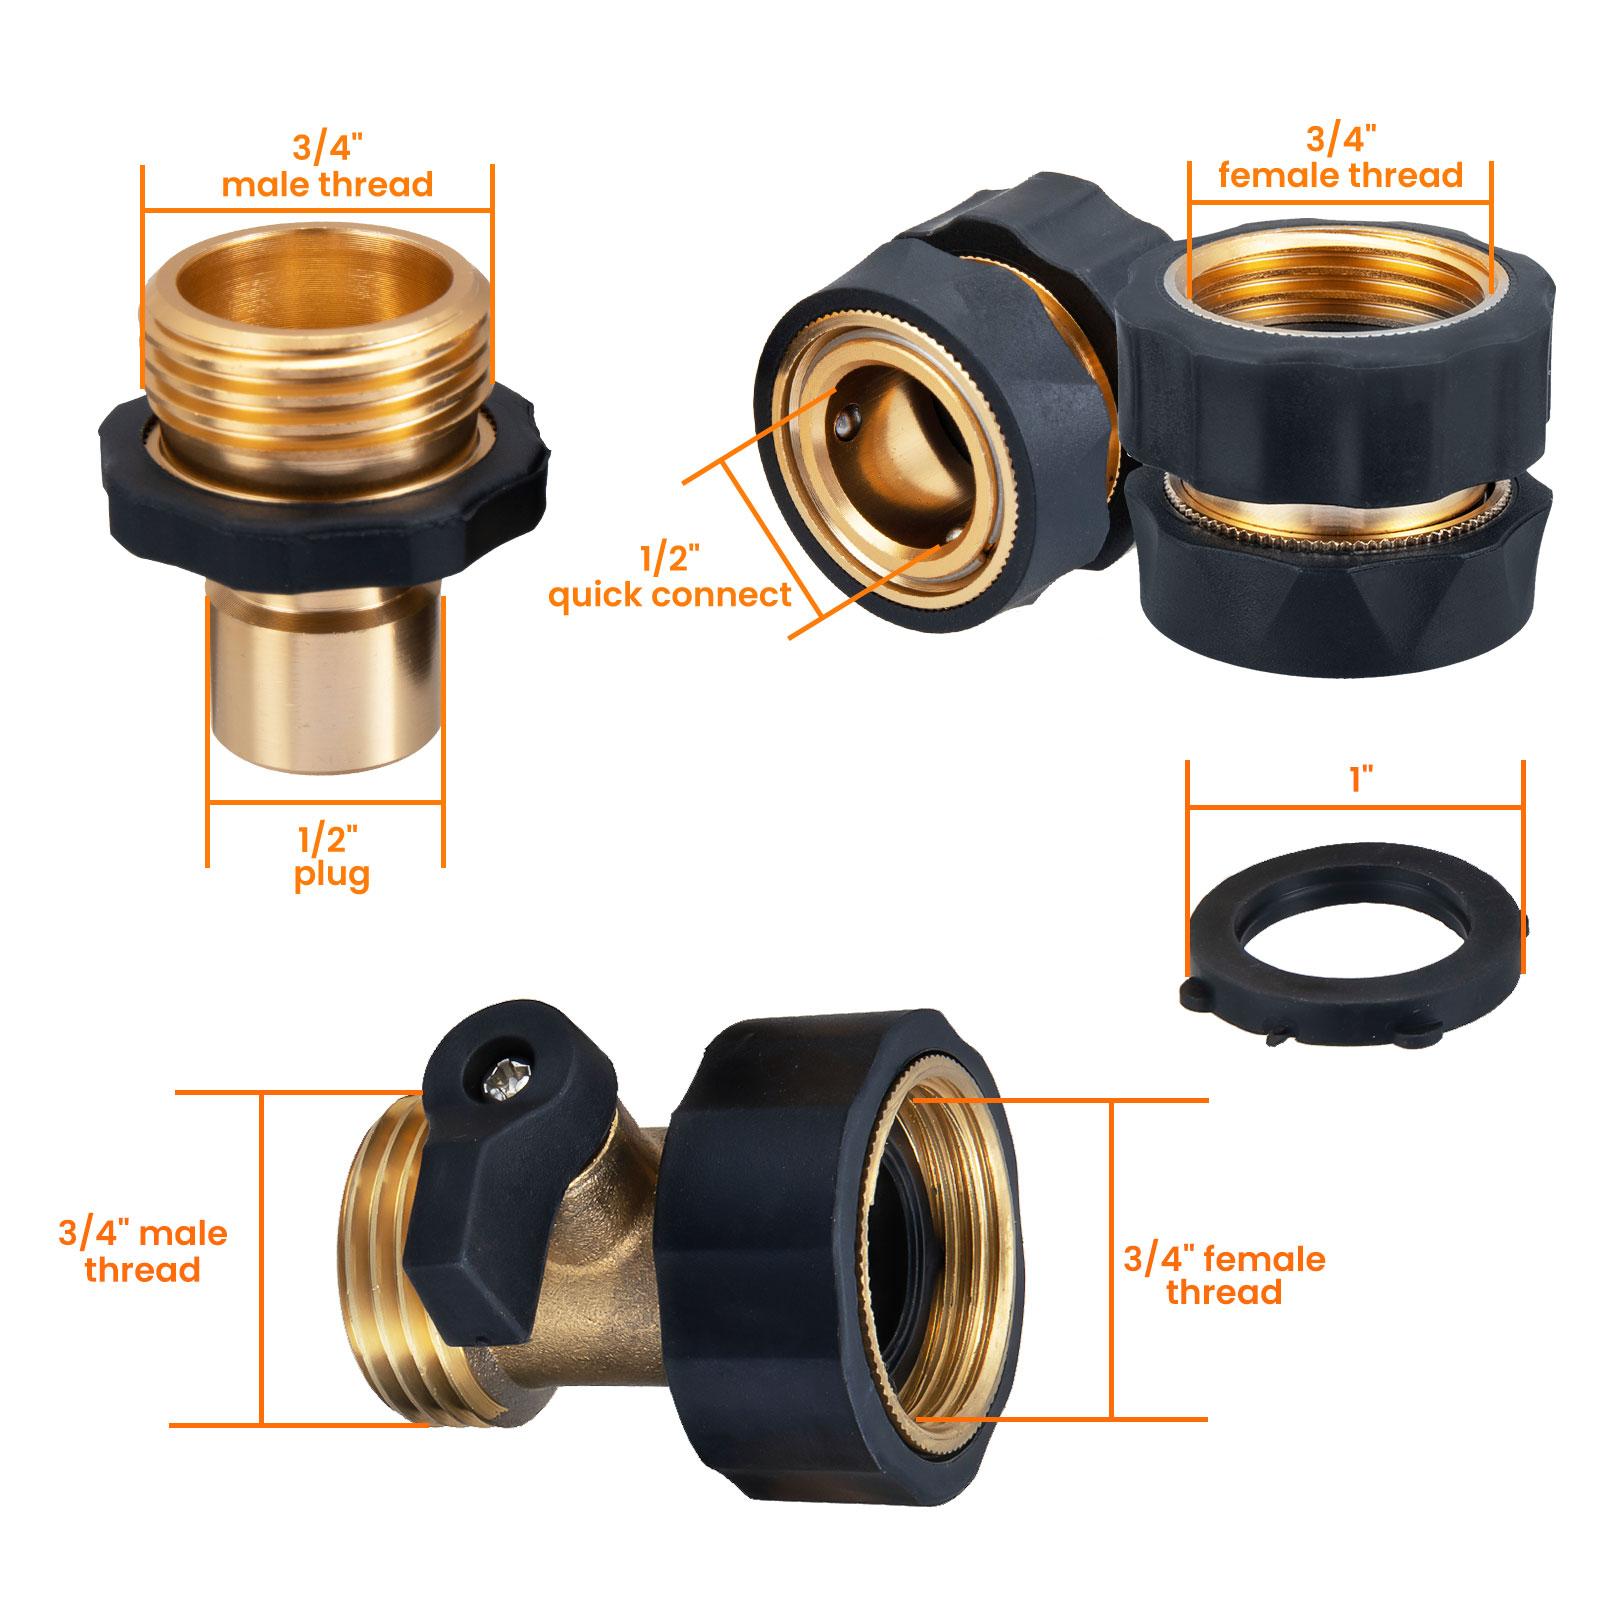 34-Garden-Hose-Quick-Connect-Water-Hose-Fit-Brass-Female-Male-Connector-Set-1943824-8